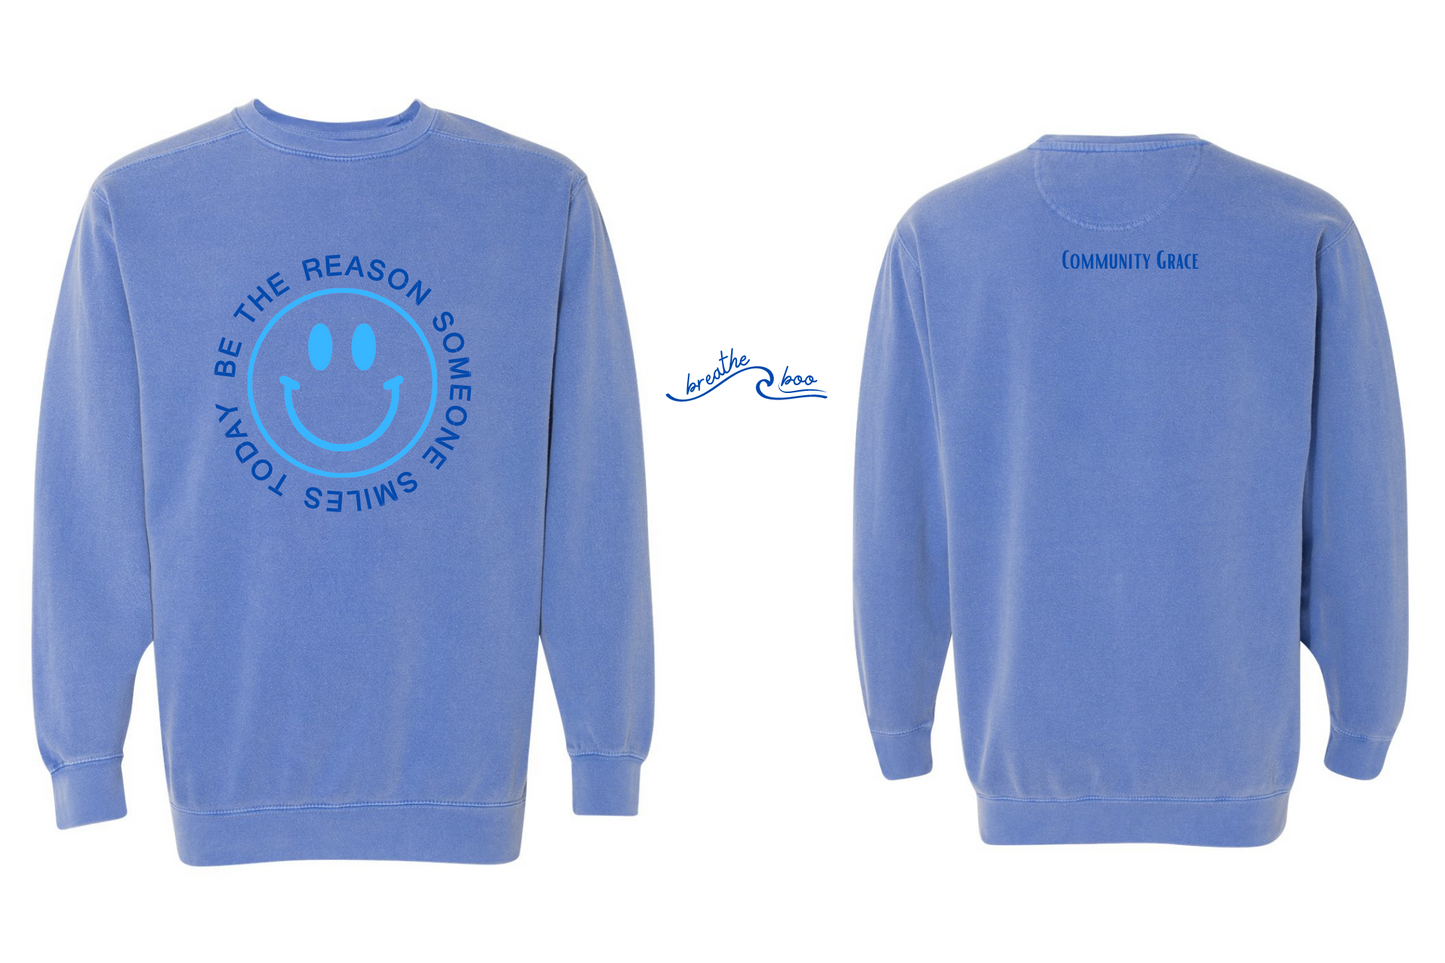 ocean blue crewneck sweatshirt with a smiley face in a vibrant electric blue color with the words "BE THE REASON SOMEONE SMILES TODAY" around it in capital letters in a navy blue tone on the front of the sweatshirt. On the back of the sweatshirt is Community Grace in a navy blue color.  The inner left sleeve of the sweatshirt has the affirmation breathe boo following the shape of a wave